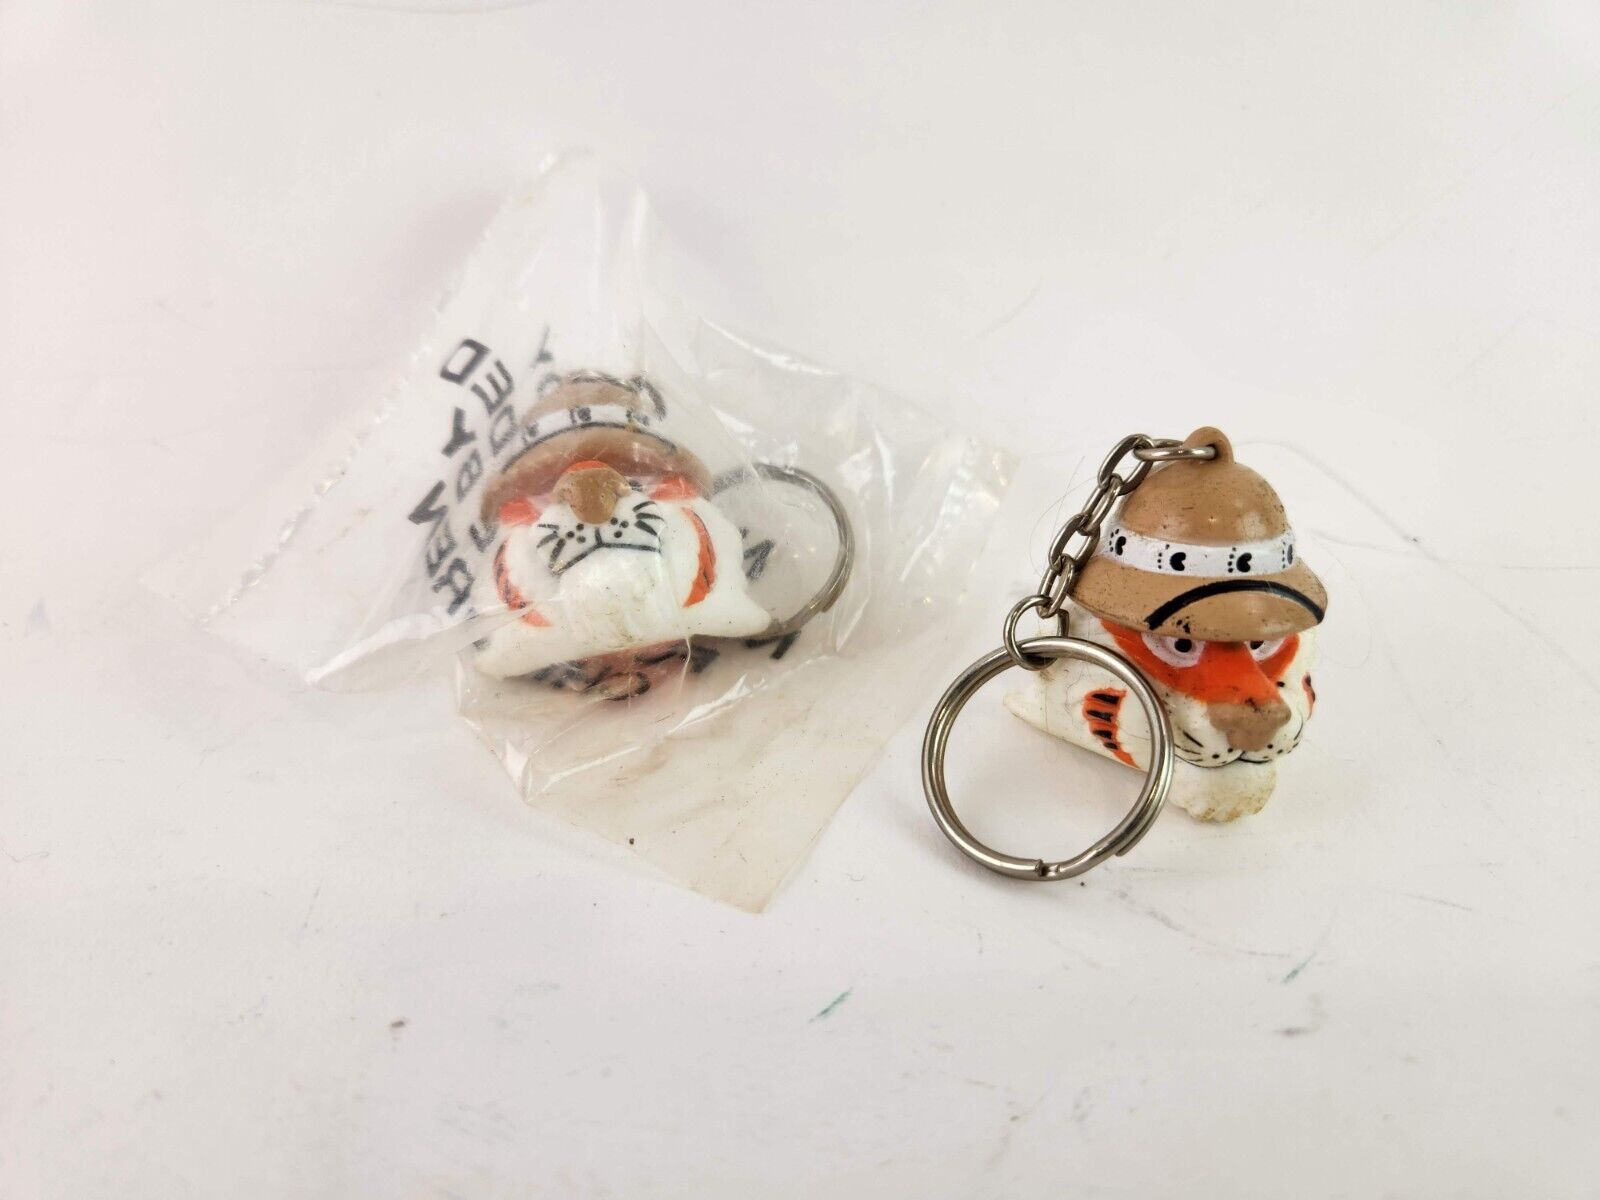 1997 EXXON Tiger with Safari Hat Keychain (1) Unopened Original Package Set of 2